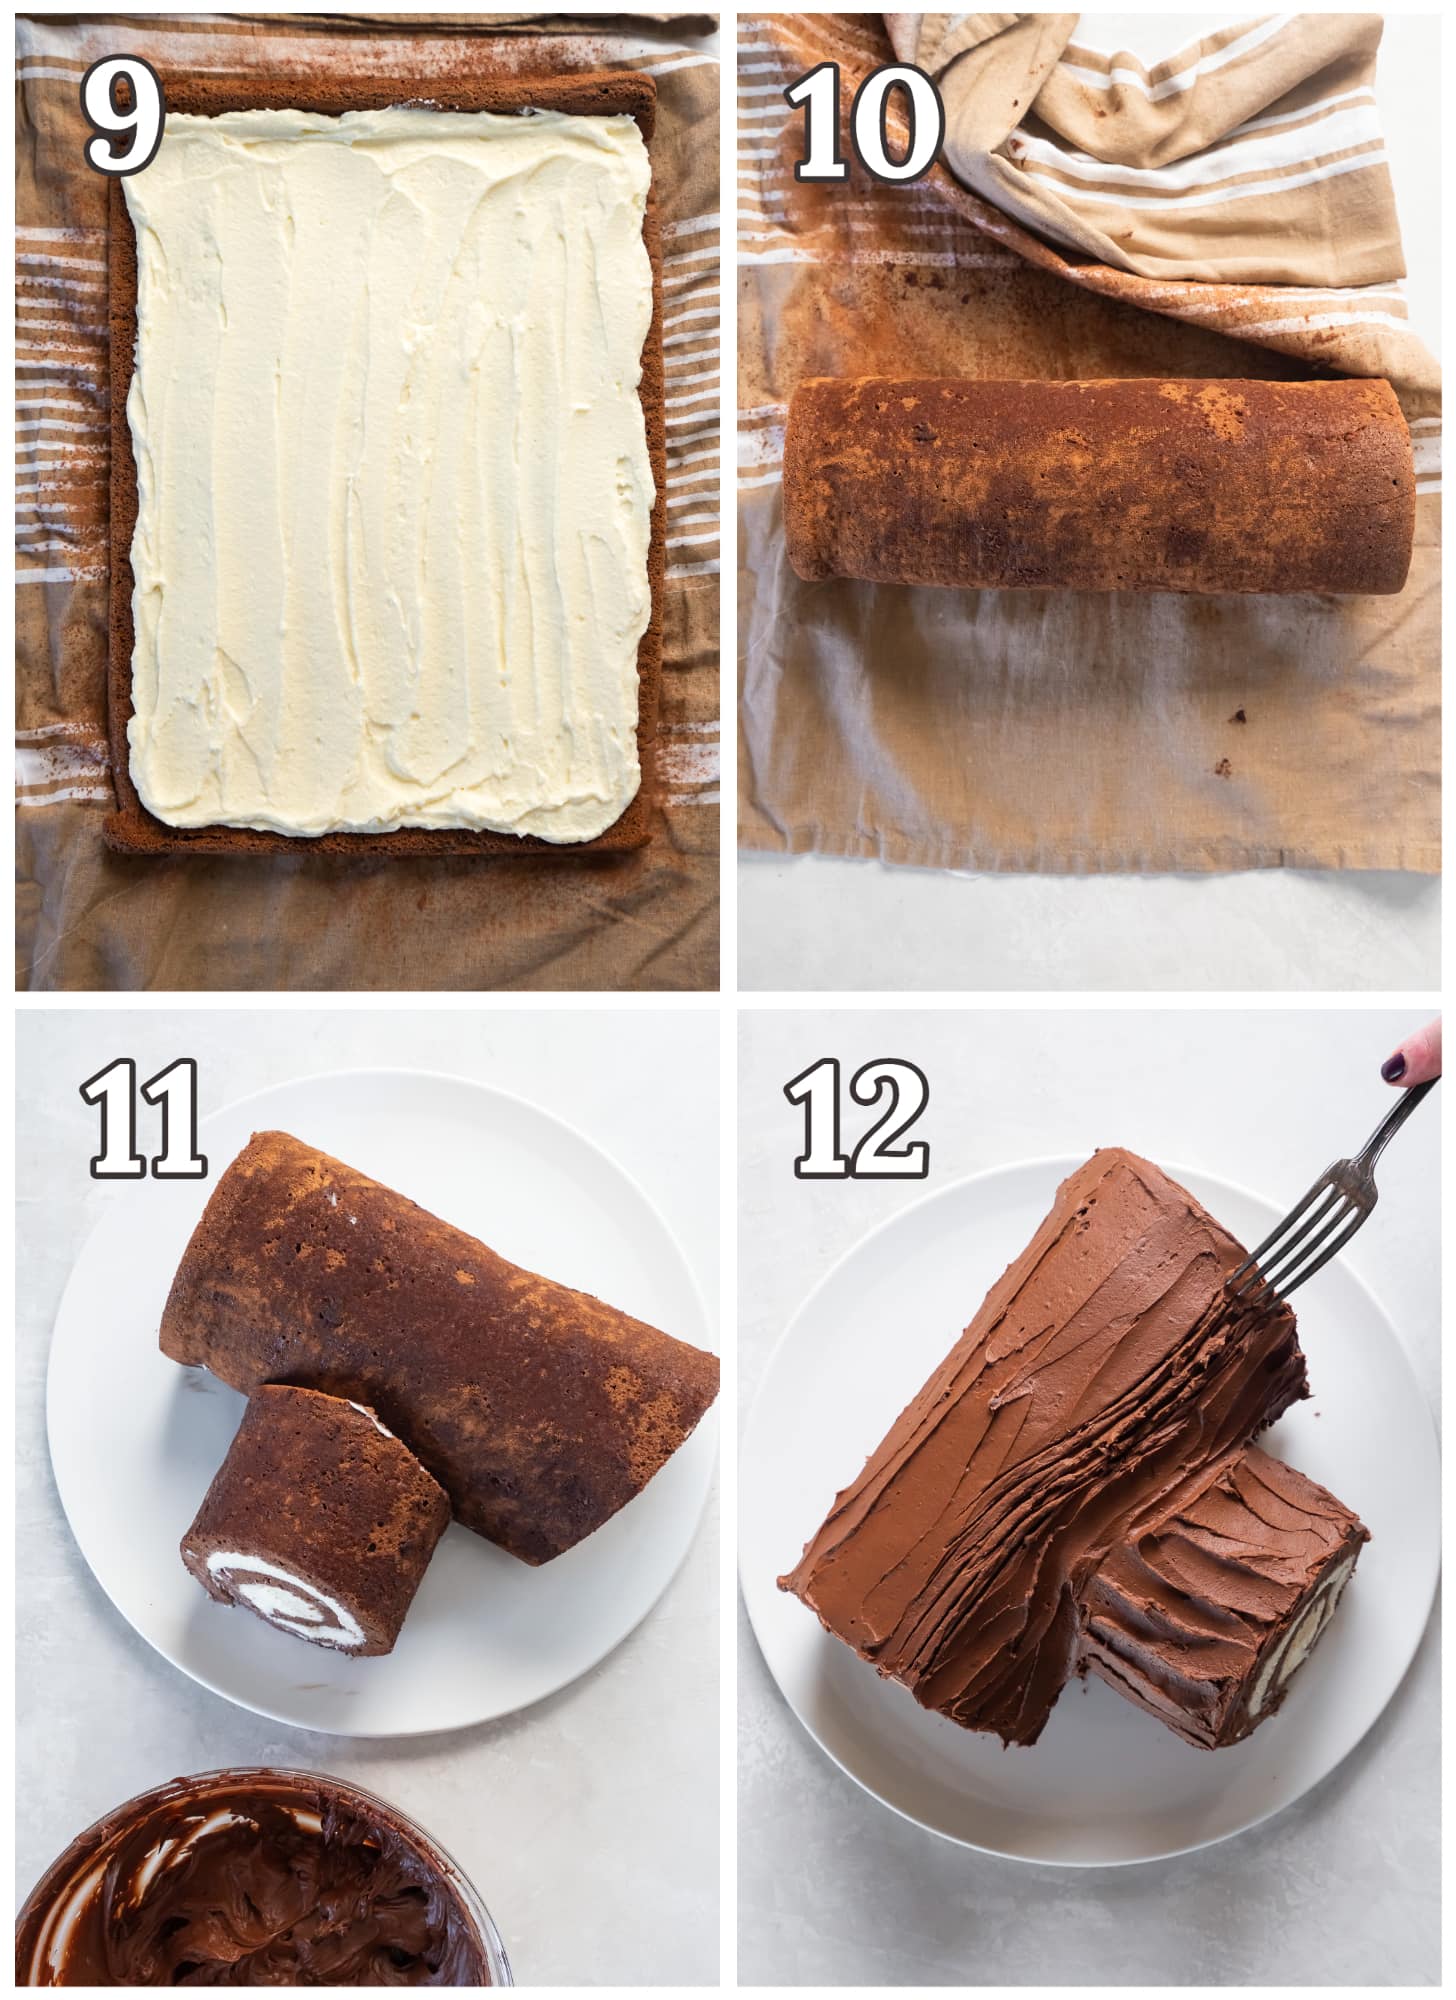 photo collage demonstrating how to frost and reroll buche de noel cake and cut into log shape.